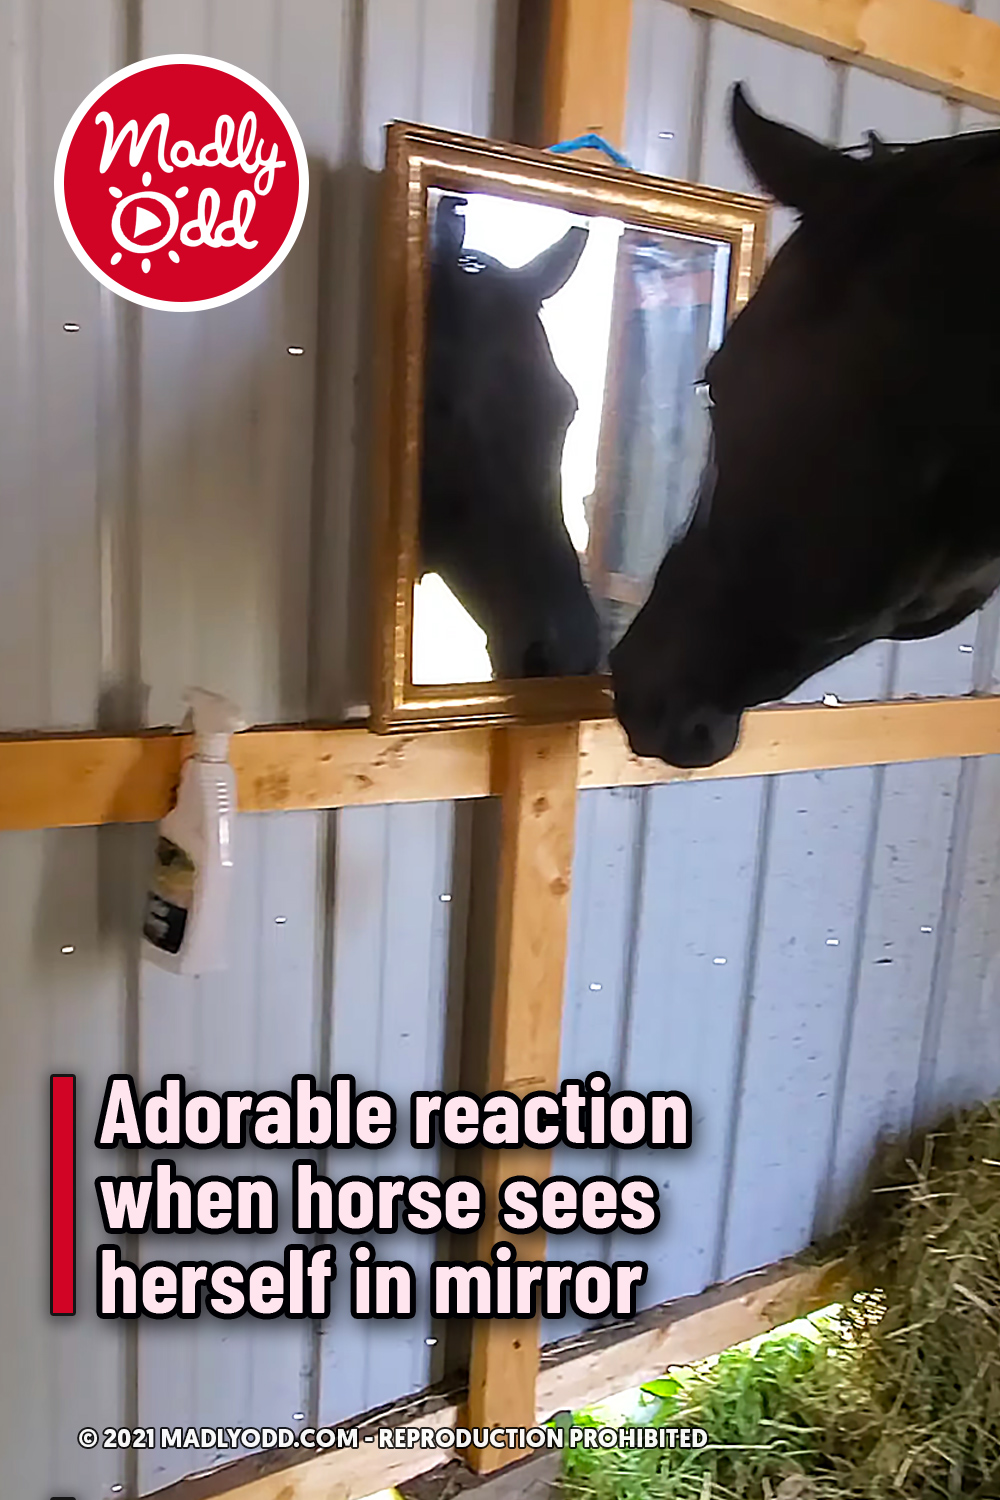 Adorable reaction when horse sees herself in mirror